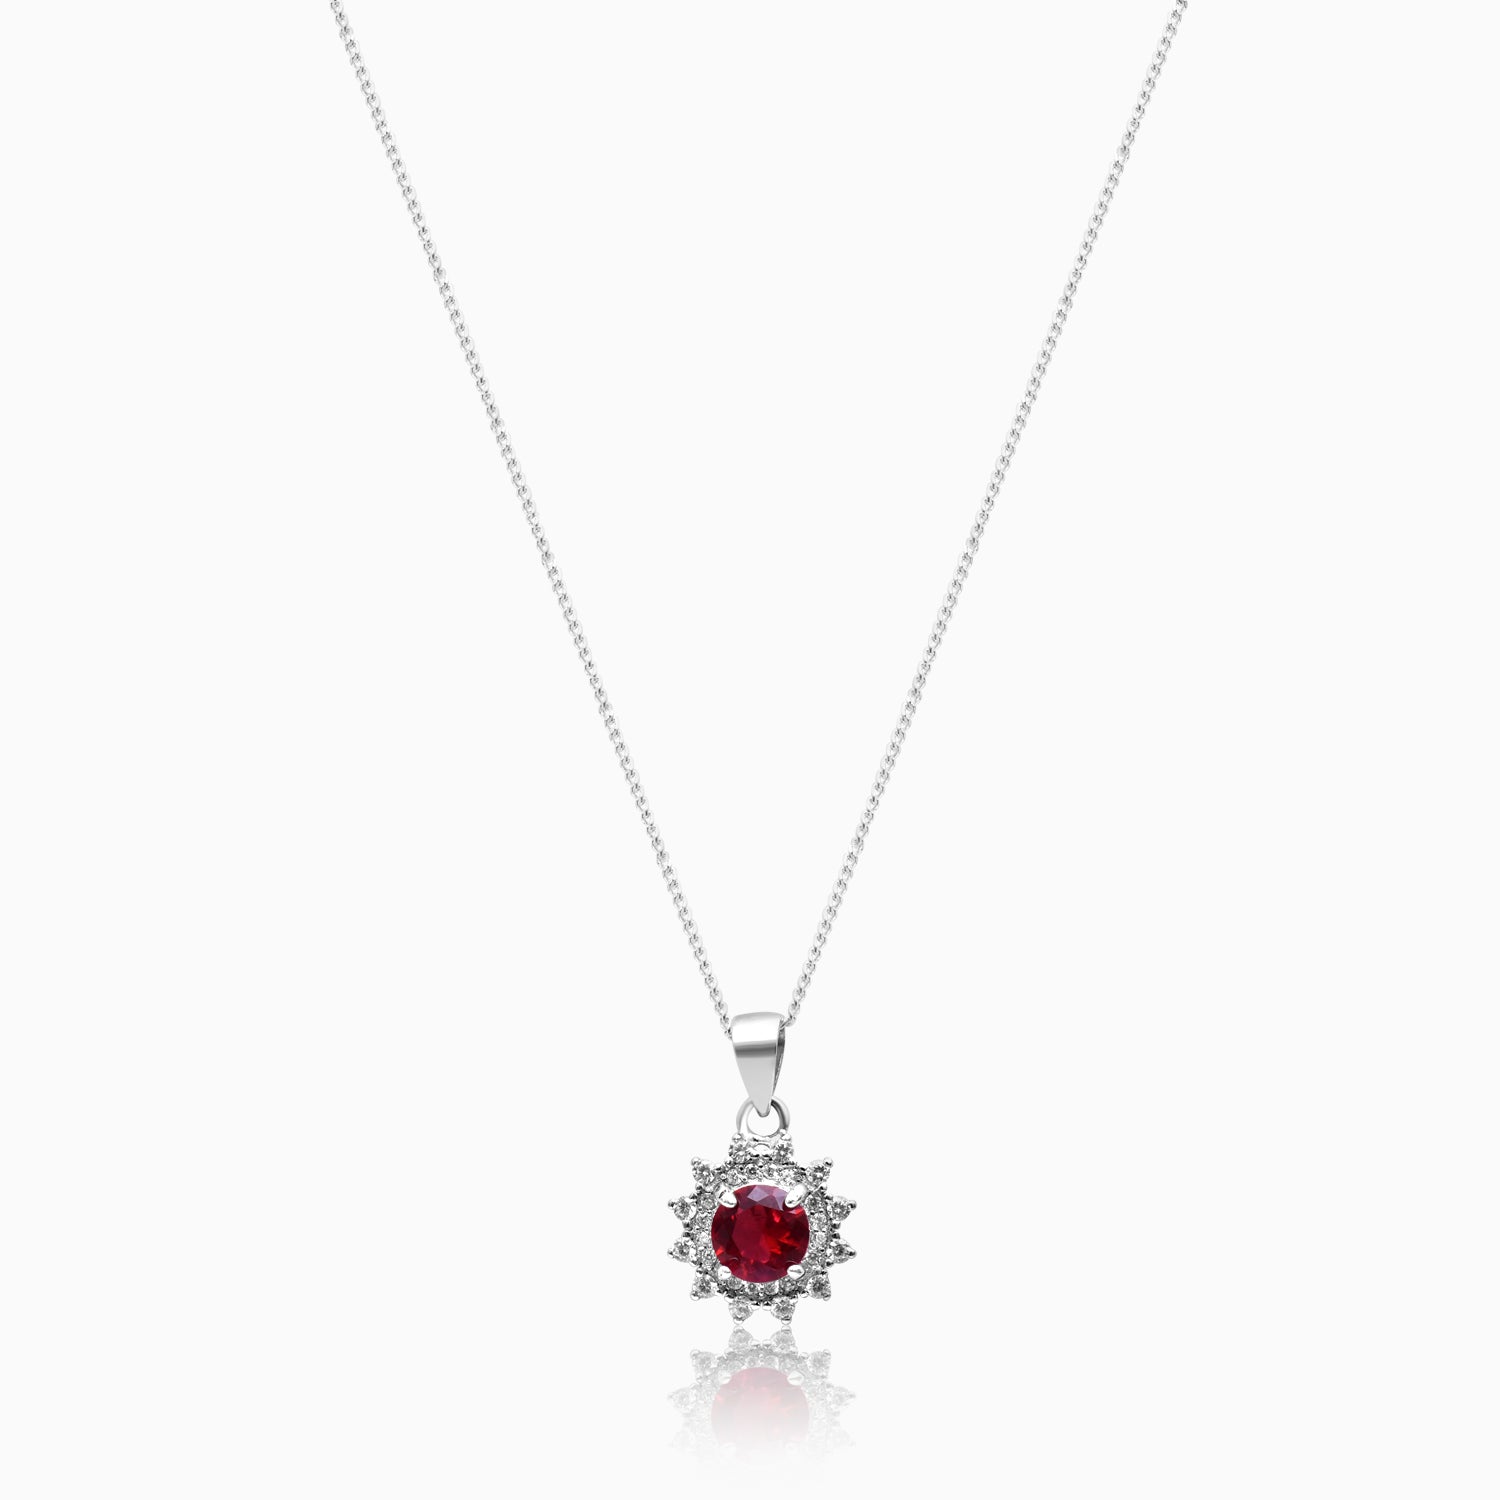 Silver Sparkling Ruby Red Pendant with Link Chain